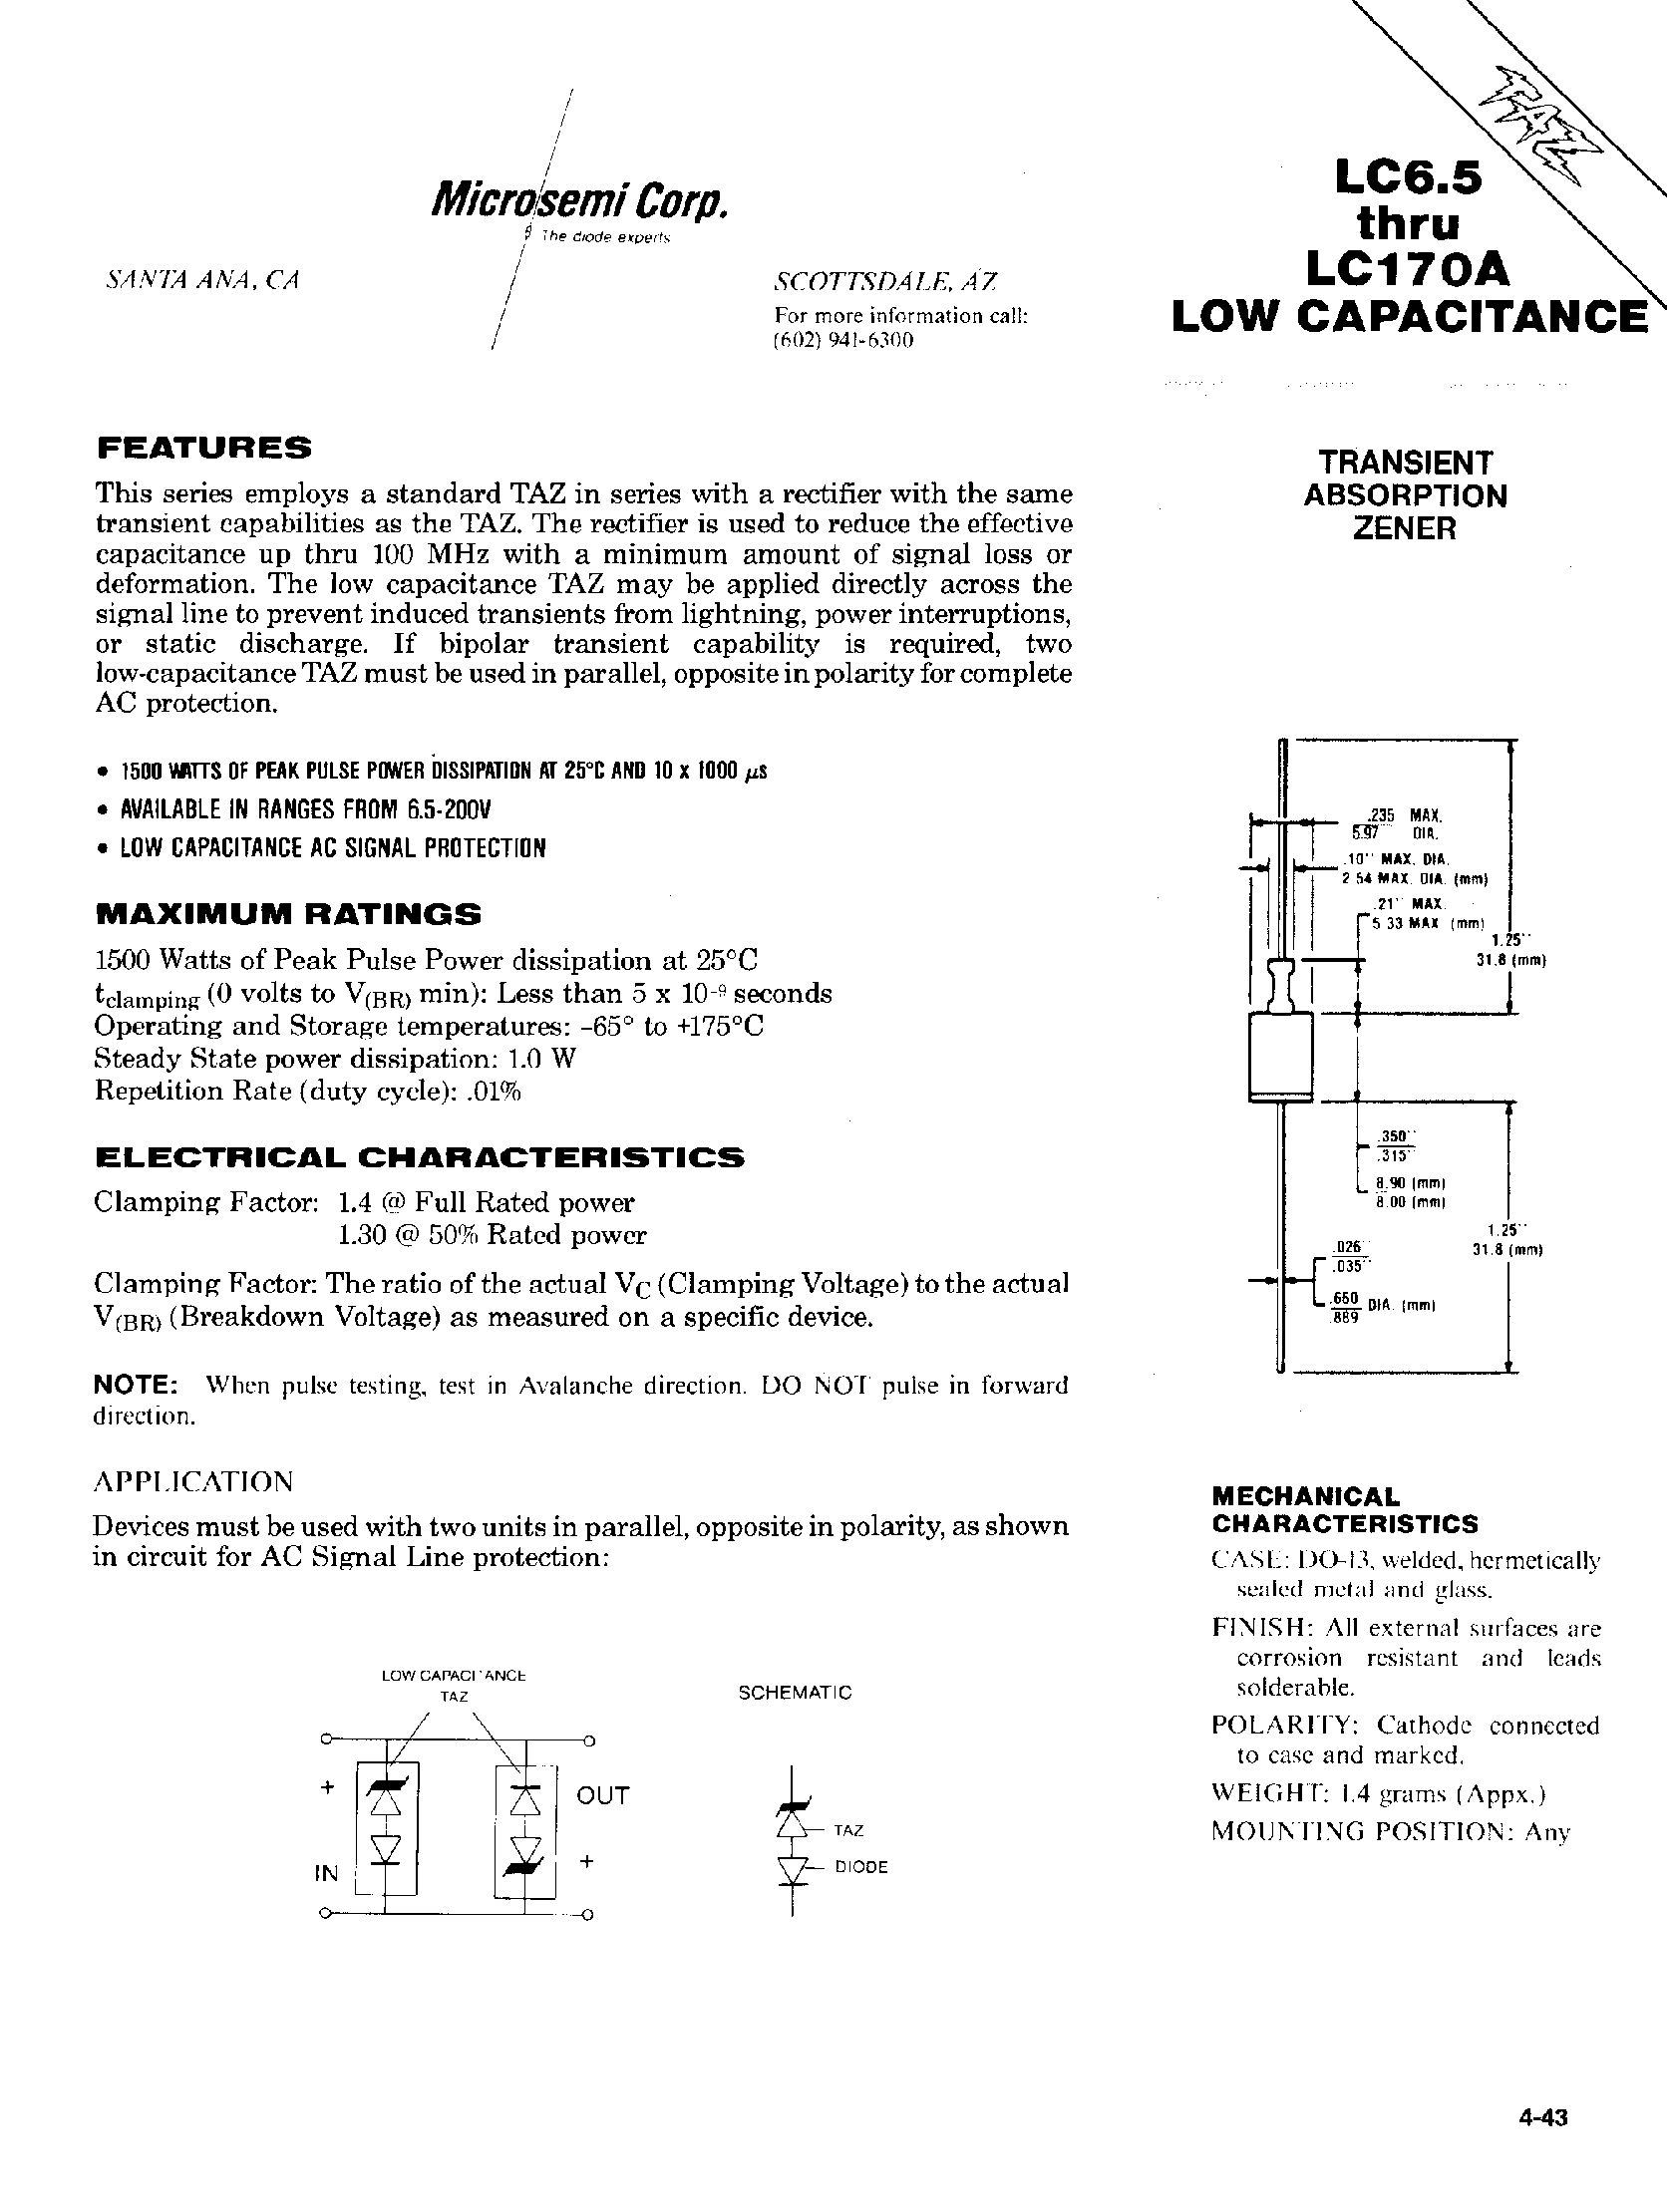 Даташит LC10A - TRANSIENT ABSORPTION ZENER страница 1